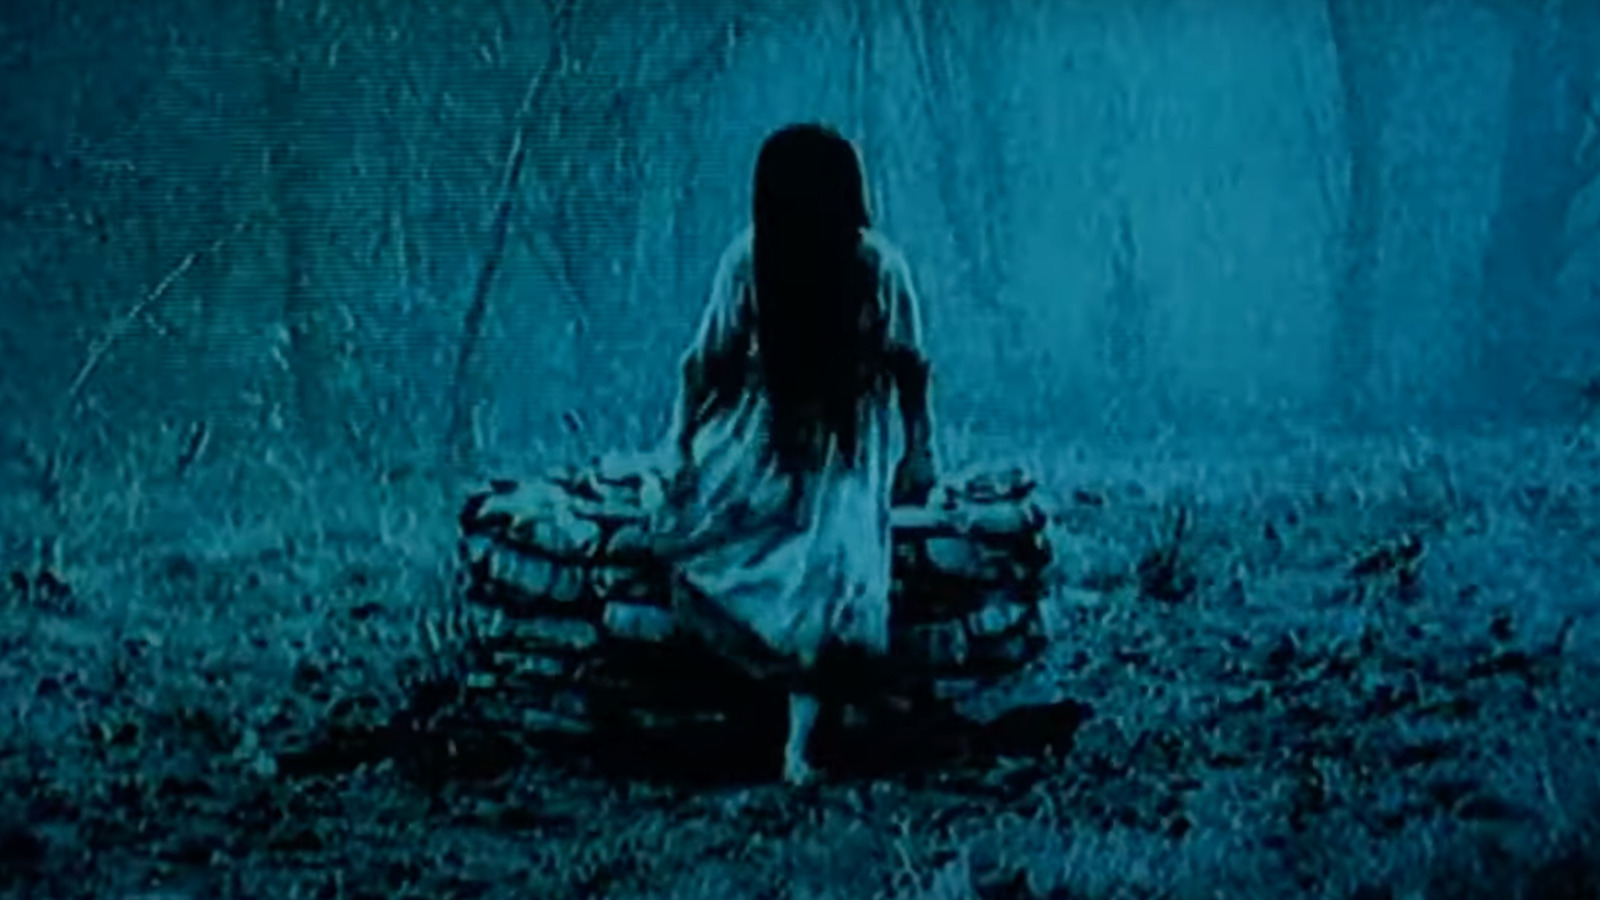 The Ring 